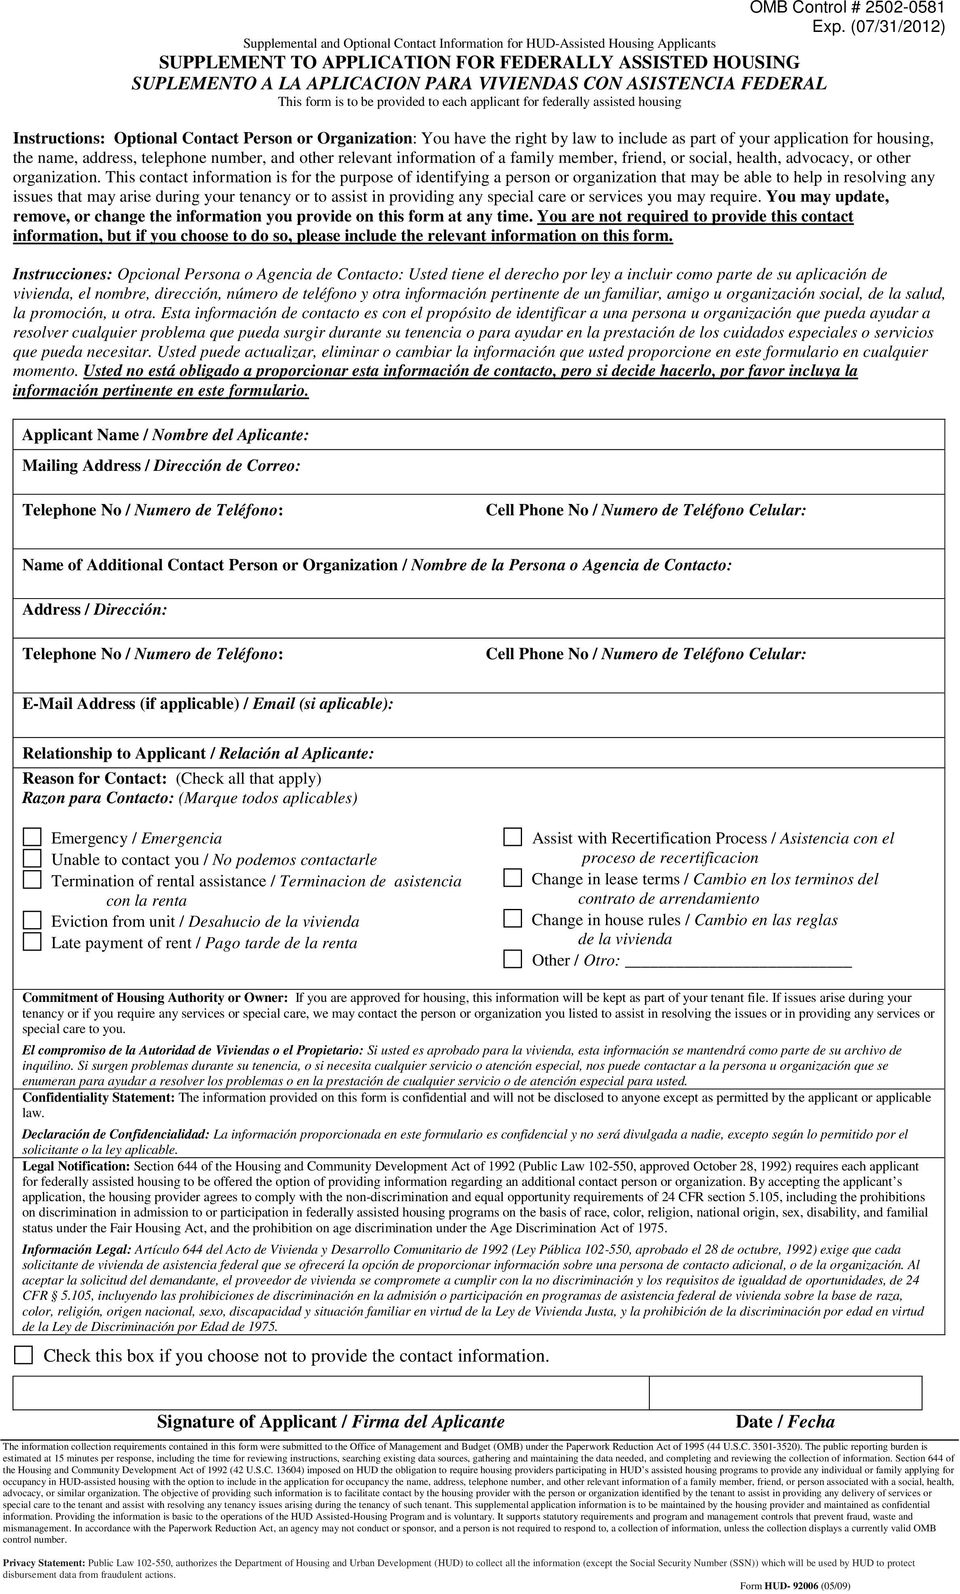 ASISTENCIA FEDERAL This form is to be provided to each applicant for federally assisted housing Instructions: Optional Contact Person or Organization: You have the right by law to include as part of